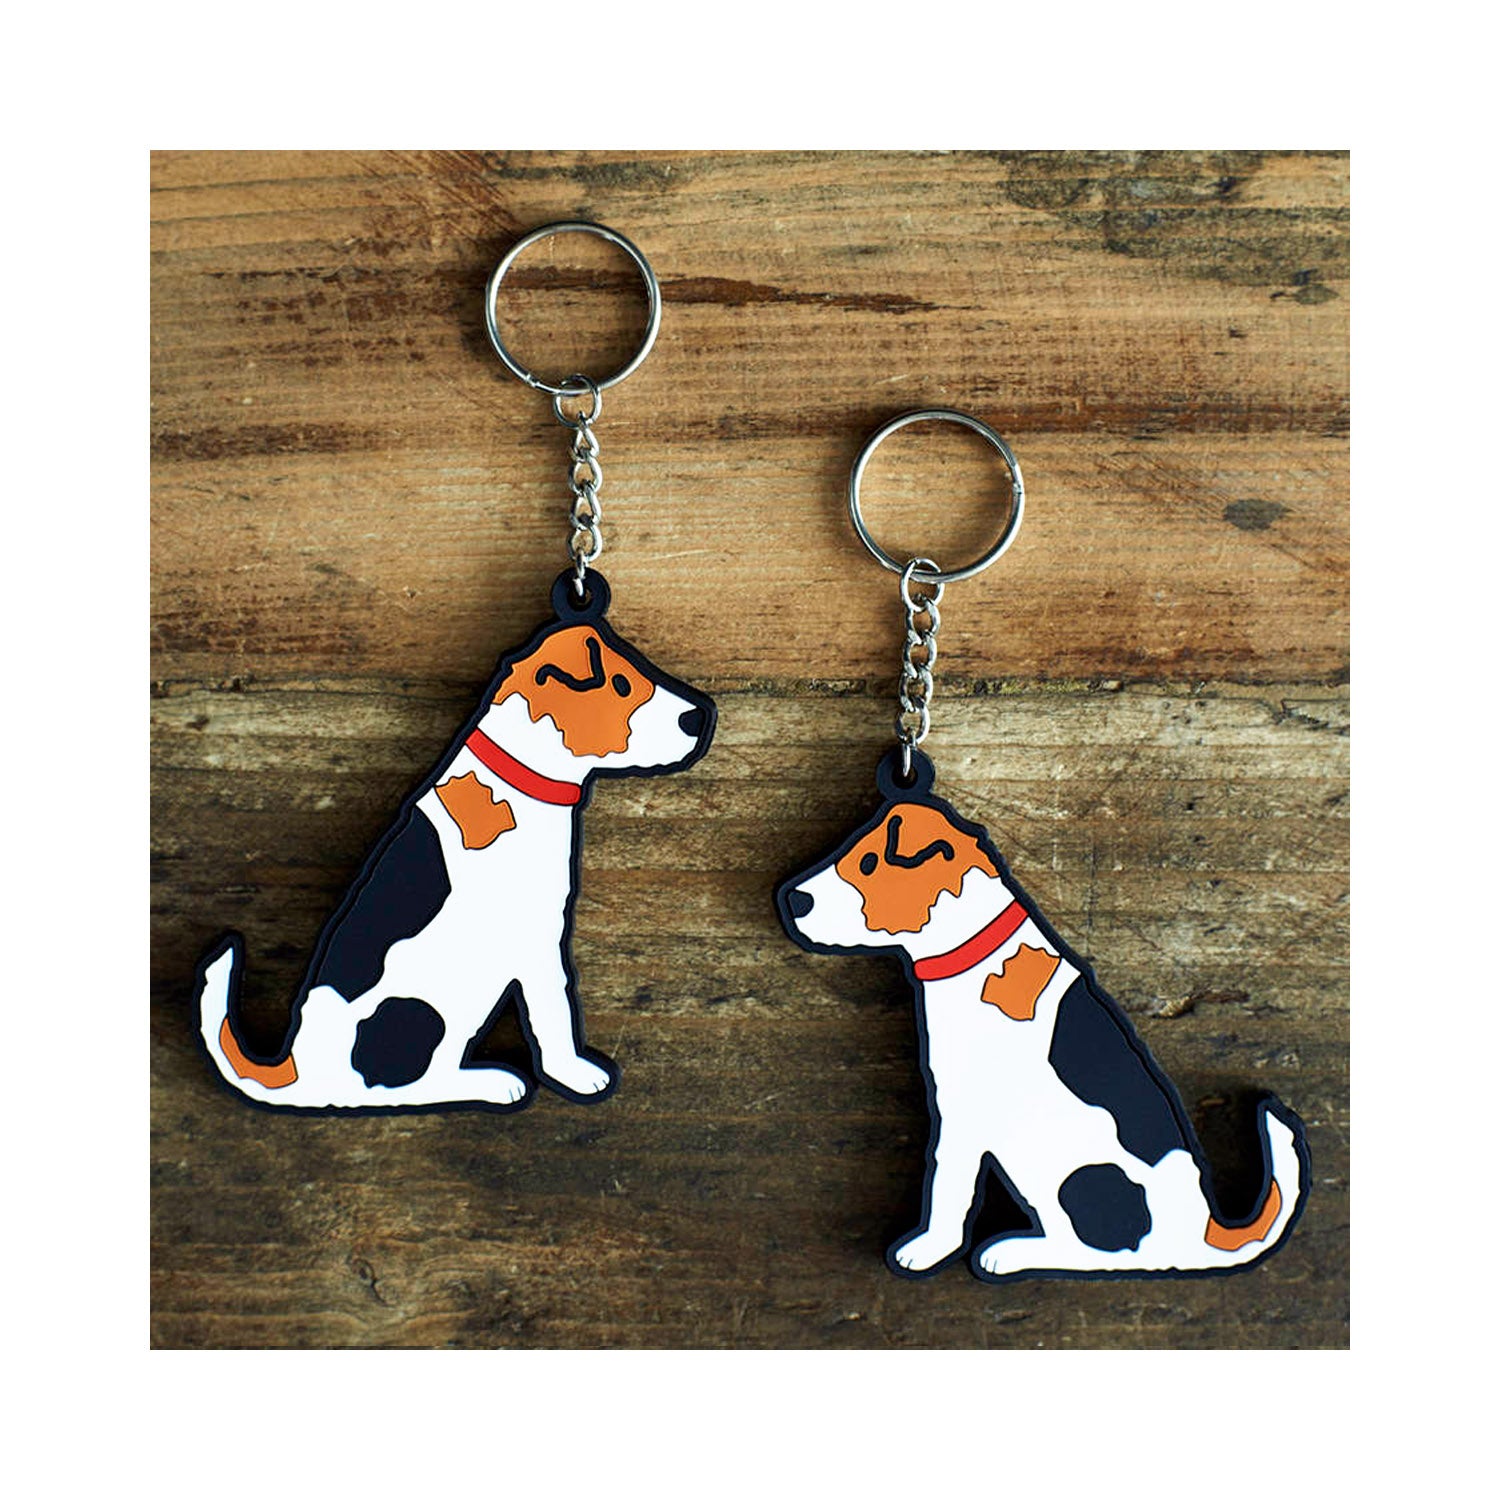 Dog Lover Gifts available at Dog Krazy Gifts - Alfie The Jack Russell Keyring - part of the Sweet William range available from Dog Krazy Gifts